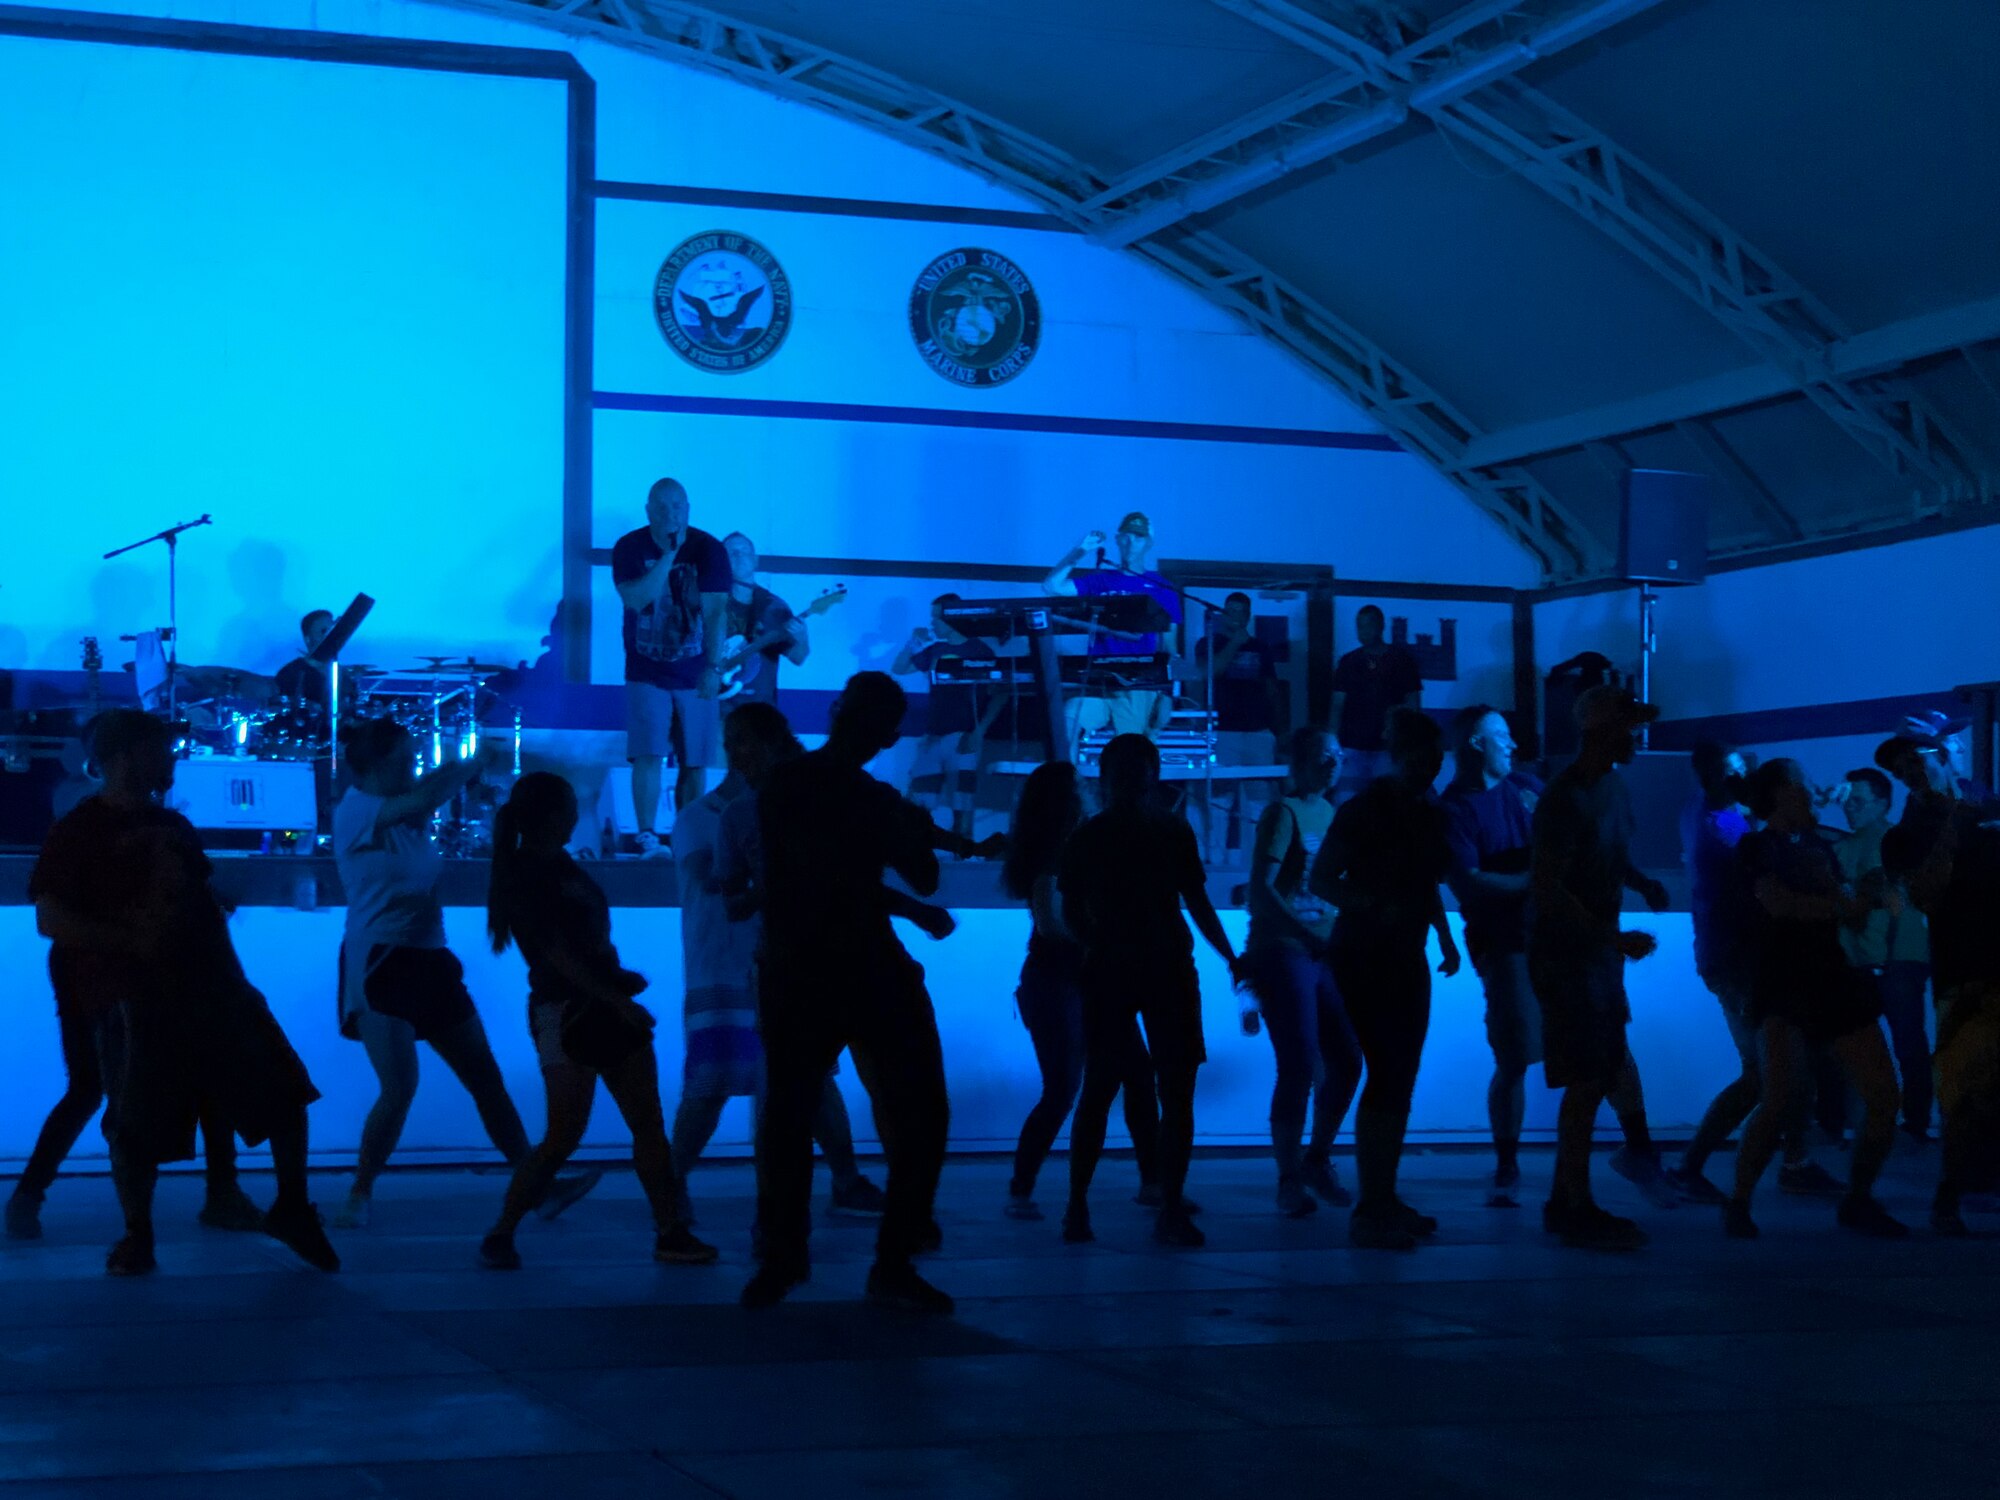 U.S. and Coalition members dance to music played by the U.S. Air Forces Central Command Band at an undisclosed location in Southwest Asia Aug. 19, 2018. The AFCENT Band has a mission to travel the U.S. Central Command area of responsibility to support and entertain deployed service members. (U.S. Air Force photo by Capt. Dustin Doyle)